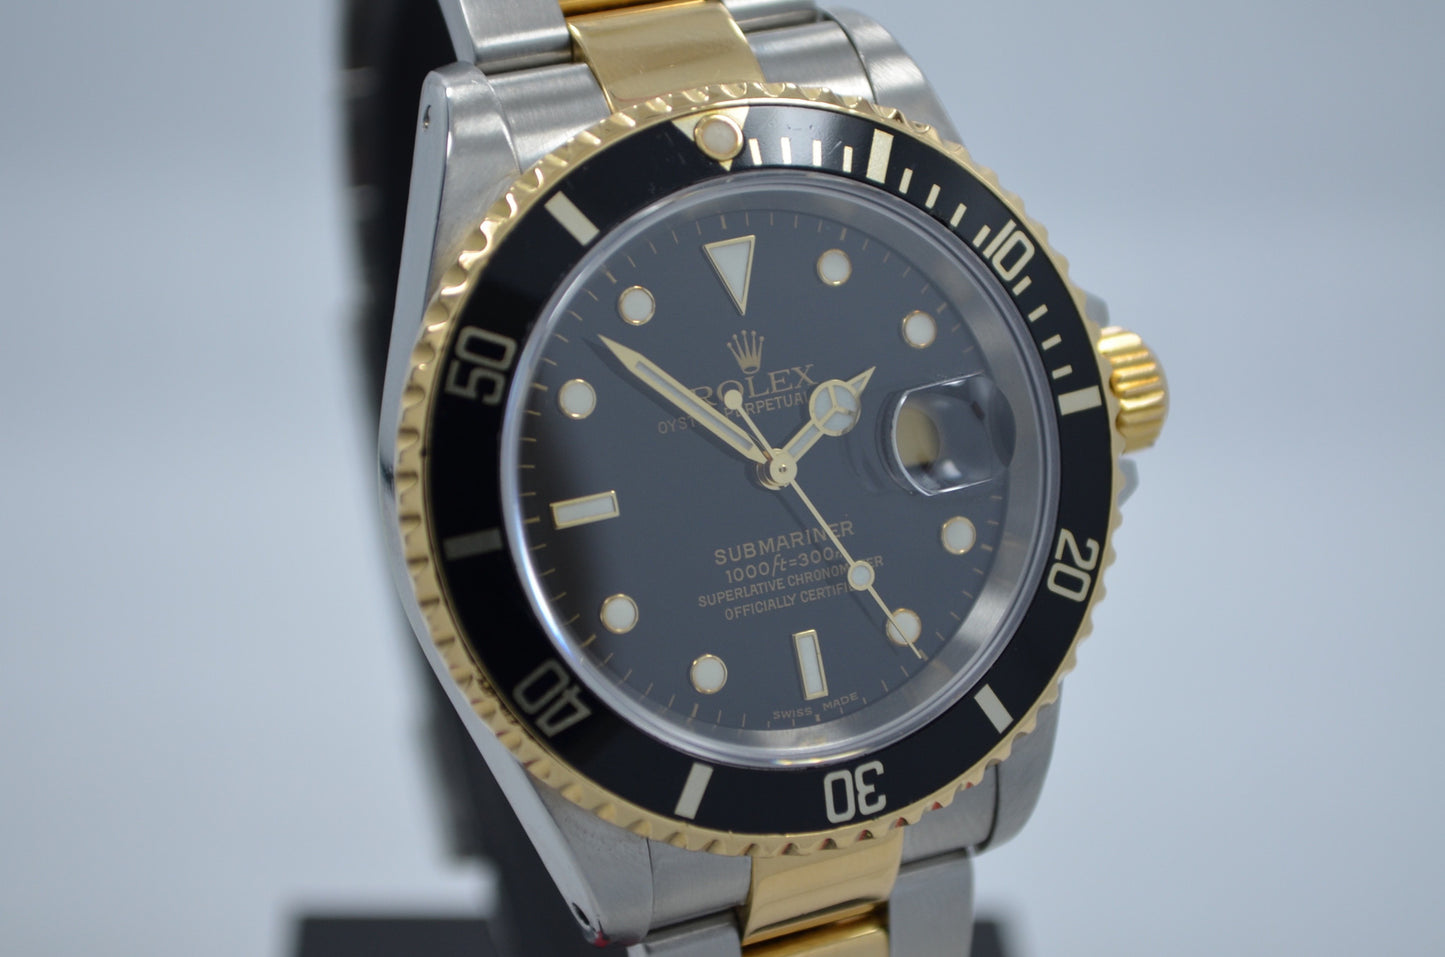 Rolex Submariner 16613 Steel 18K Gold Two Tone Black "E" Serial Wristwatch - Hashtag Watch Company